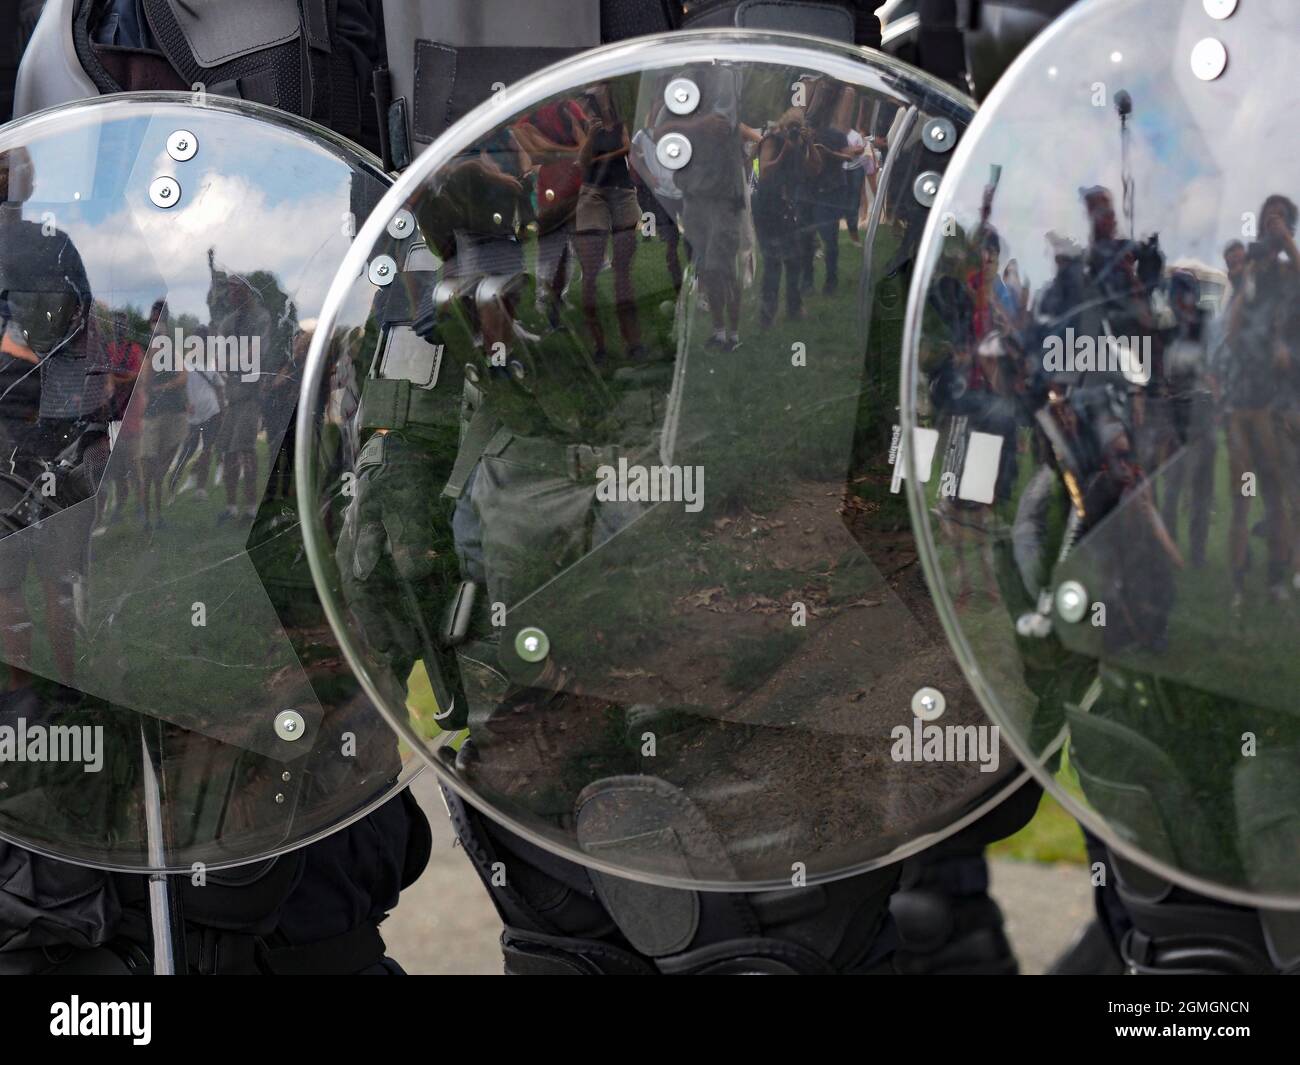 September 18, 2021, Washington, District of Columbia, USA: Participants at the Justice for J6 Rally are reflected in the police shields. Attendance was smaller than predicted with police and journalists outnumbering rally participants. (Credit Image: © Sue Dorfman/ZUMA Press Wire) Stock Photo